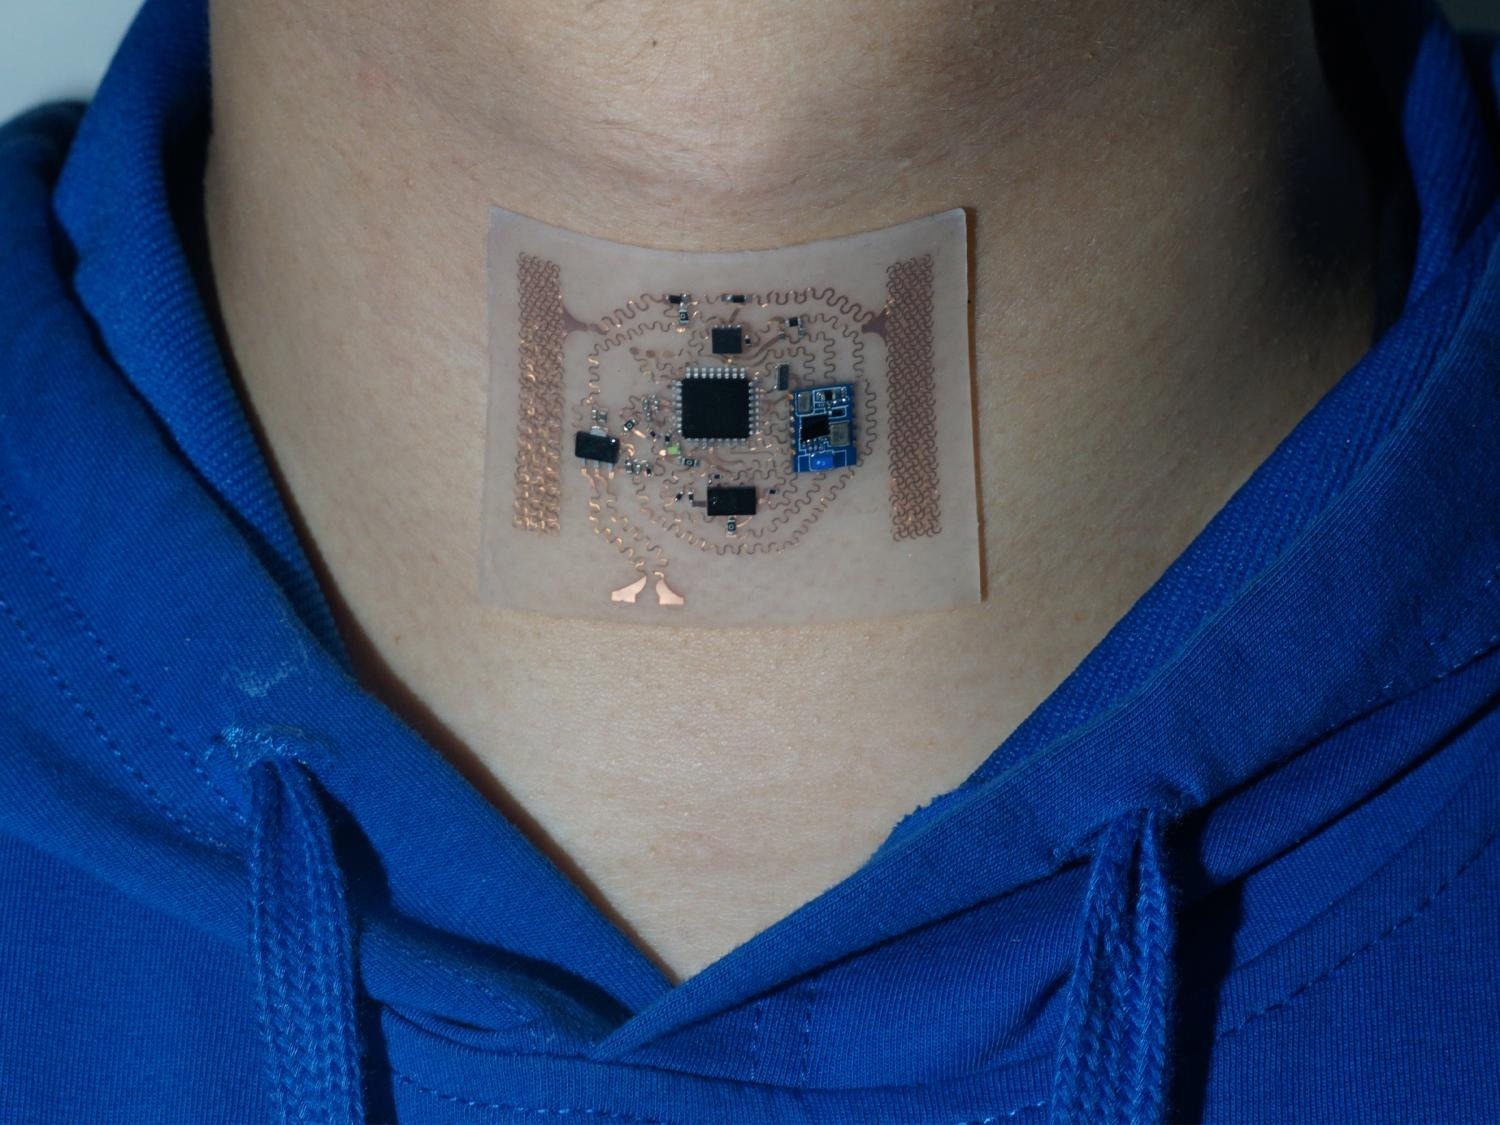 Wearable Stretchy Sensors for Processing and Predicting Health Data